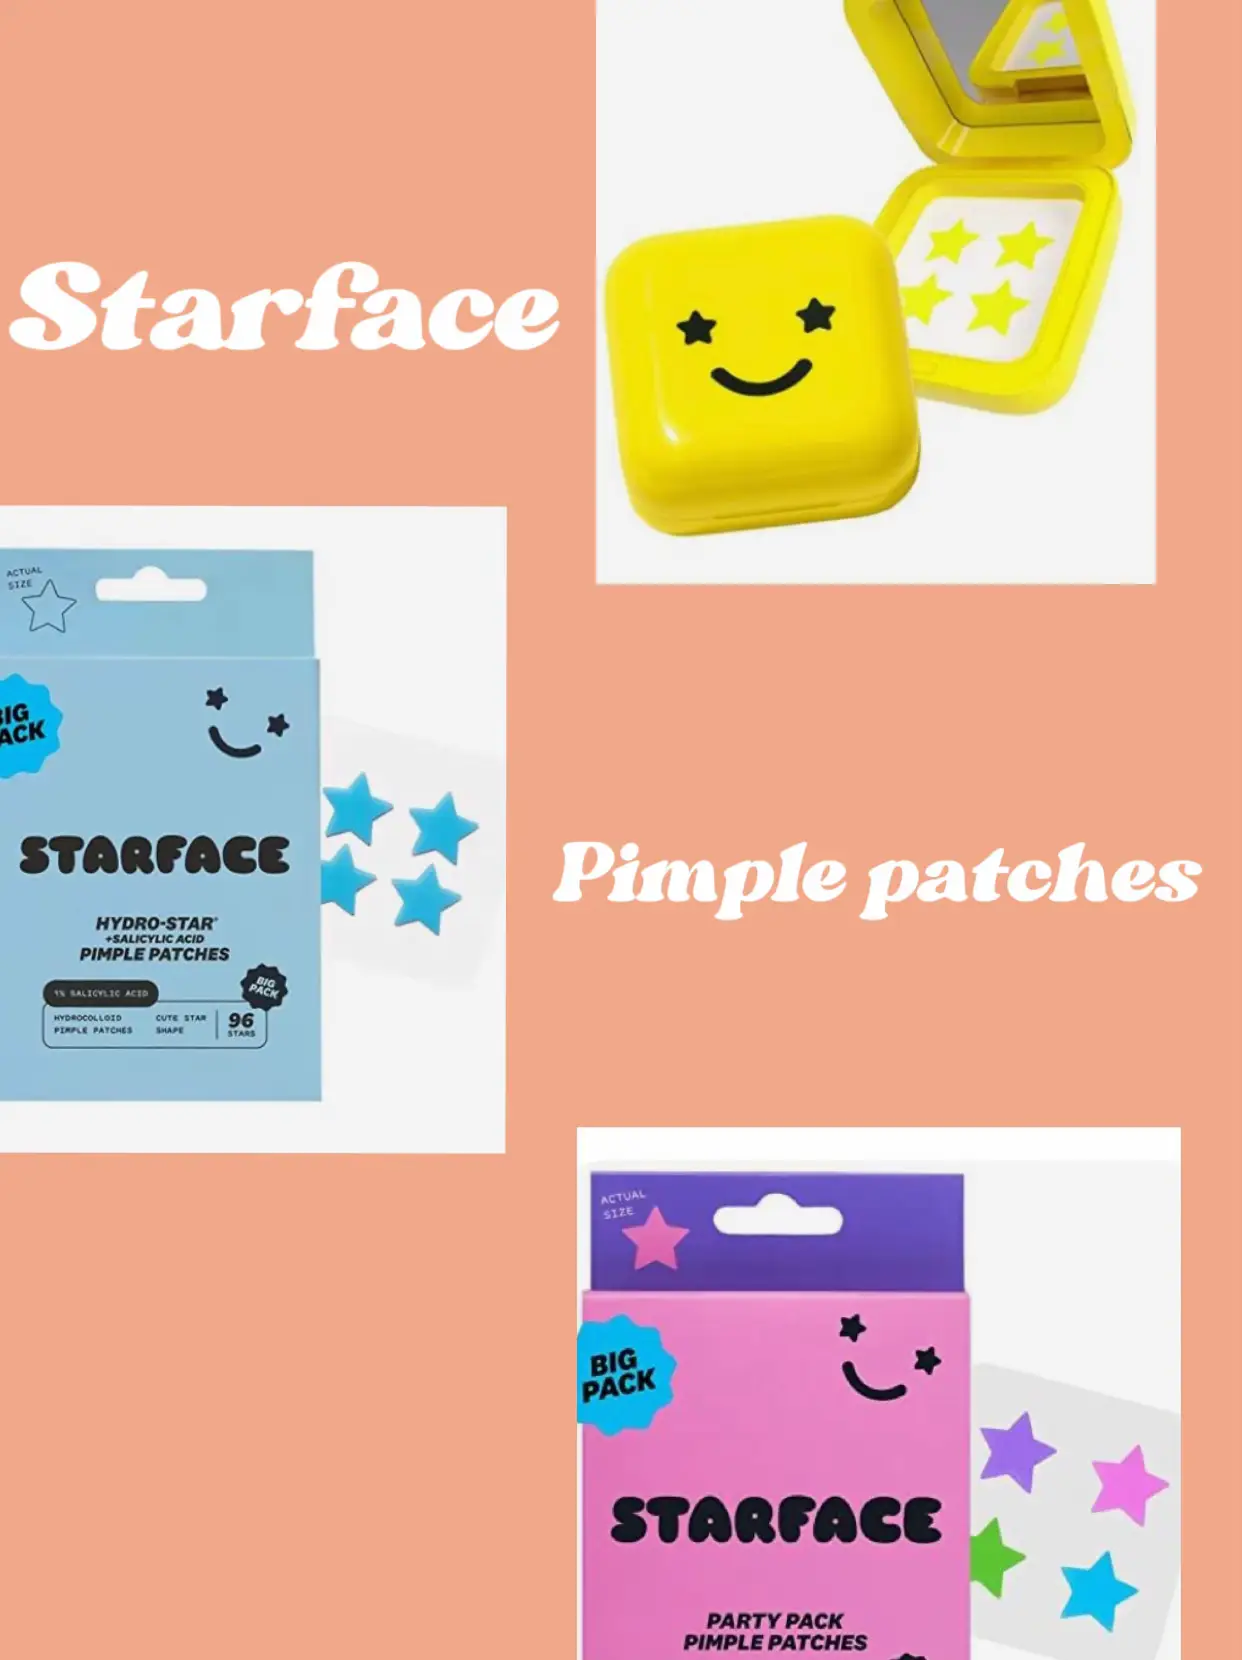 Starface Releases New Glow Stars Pimple Patches